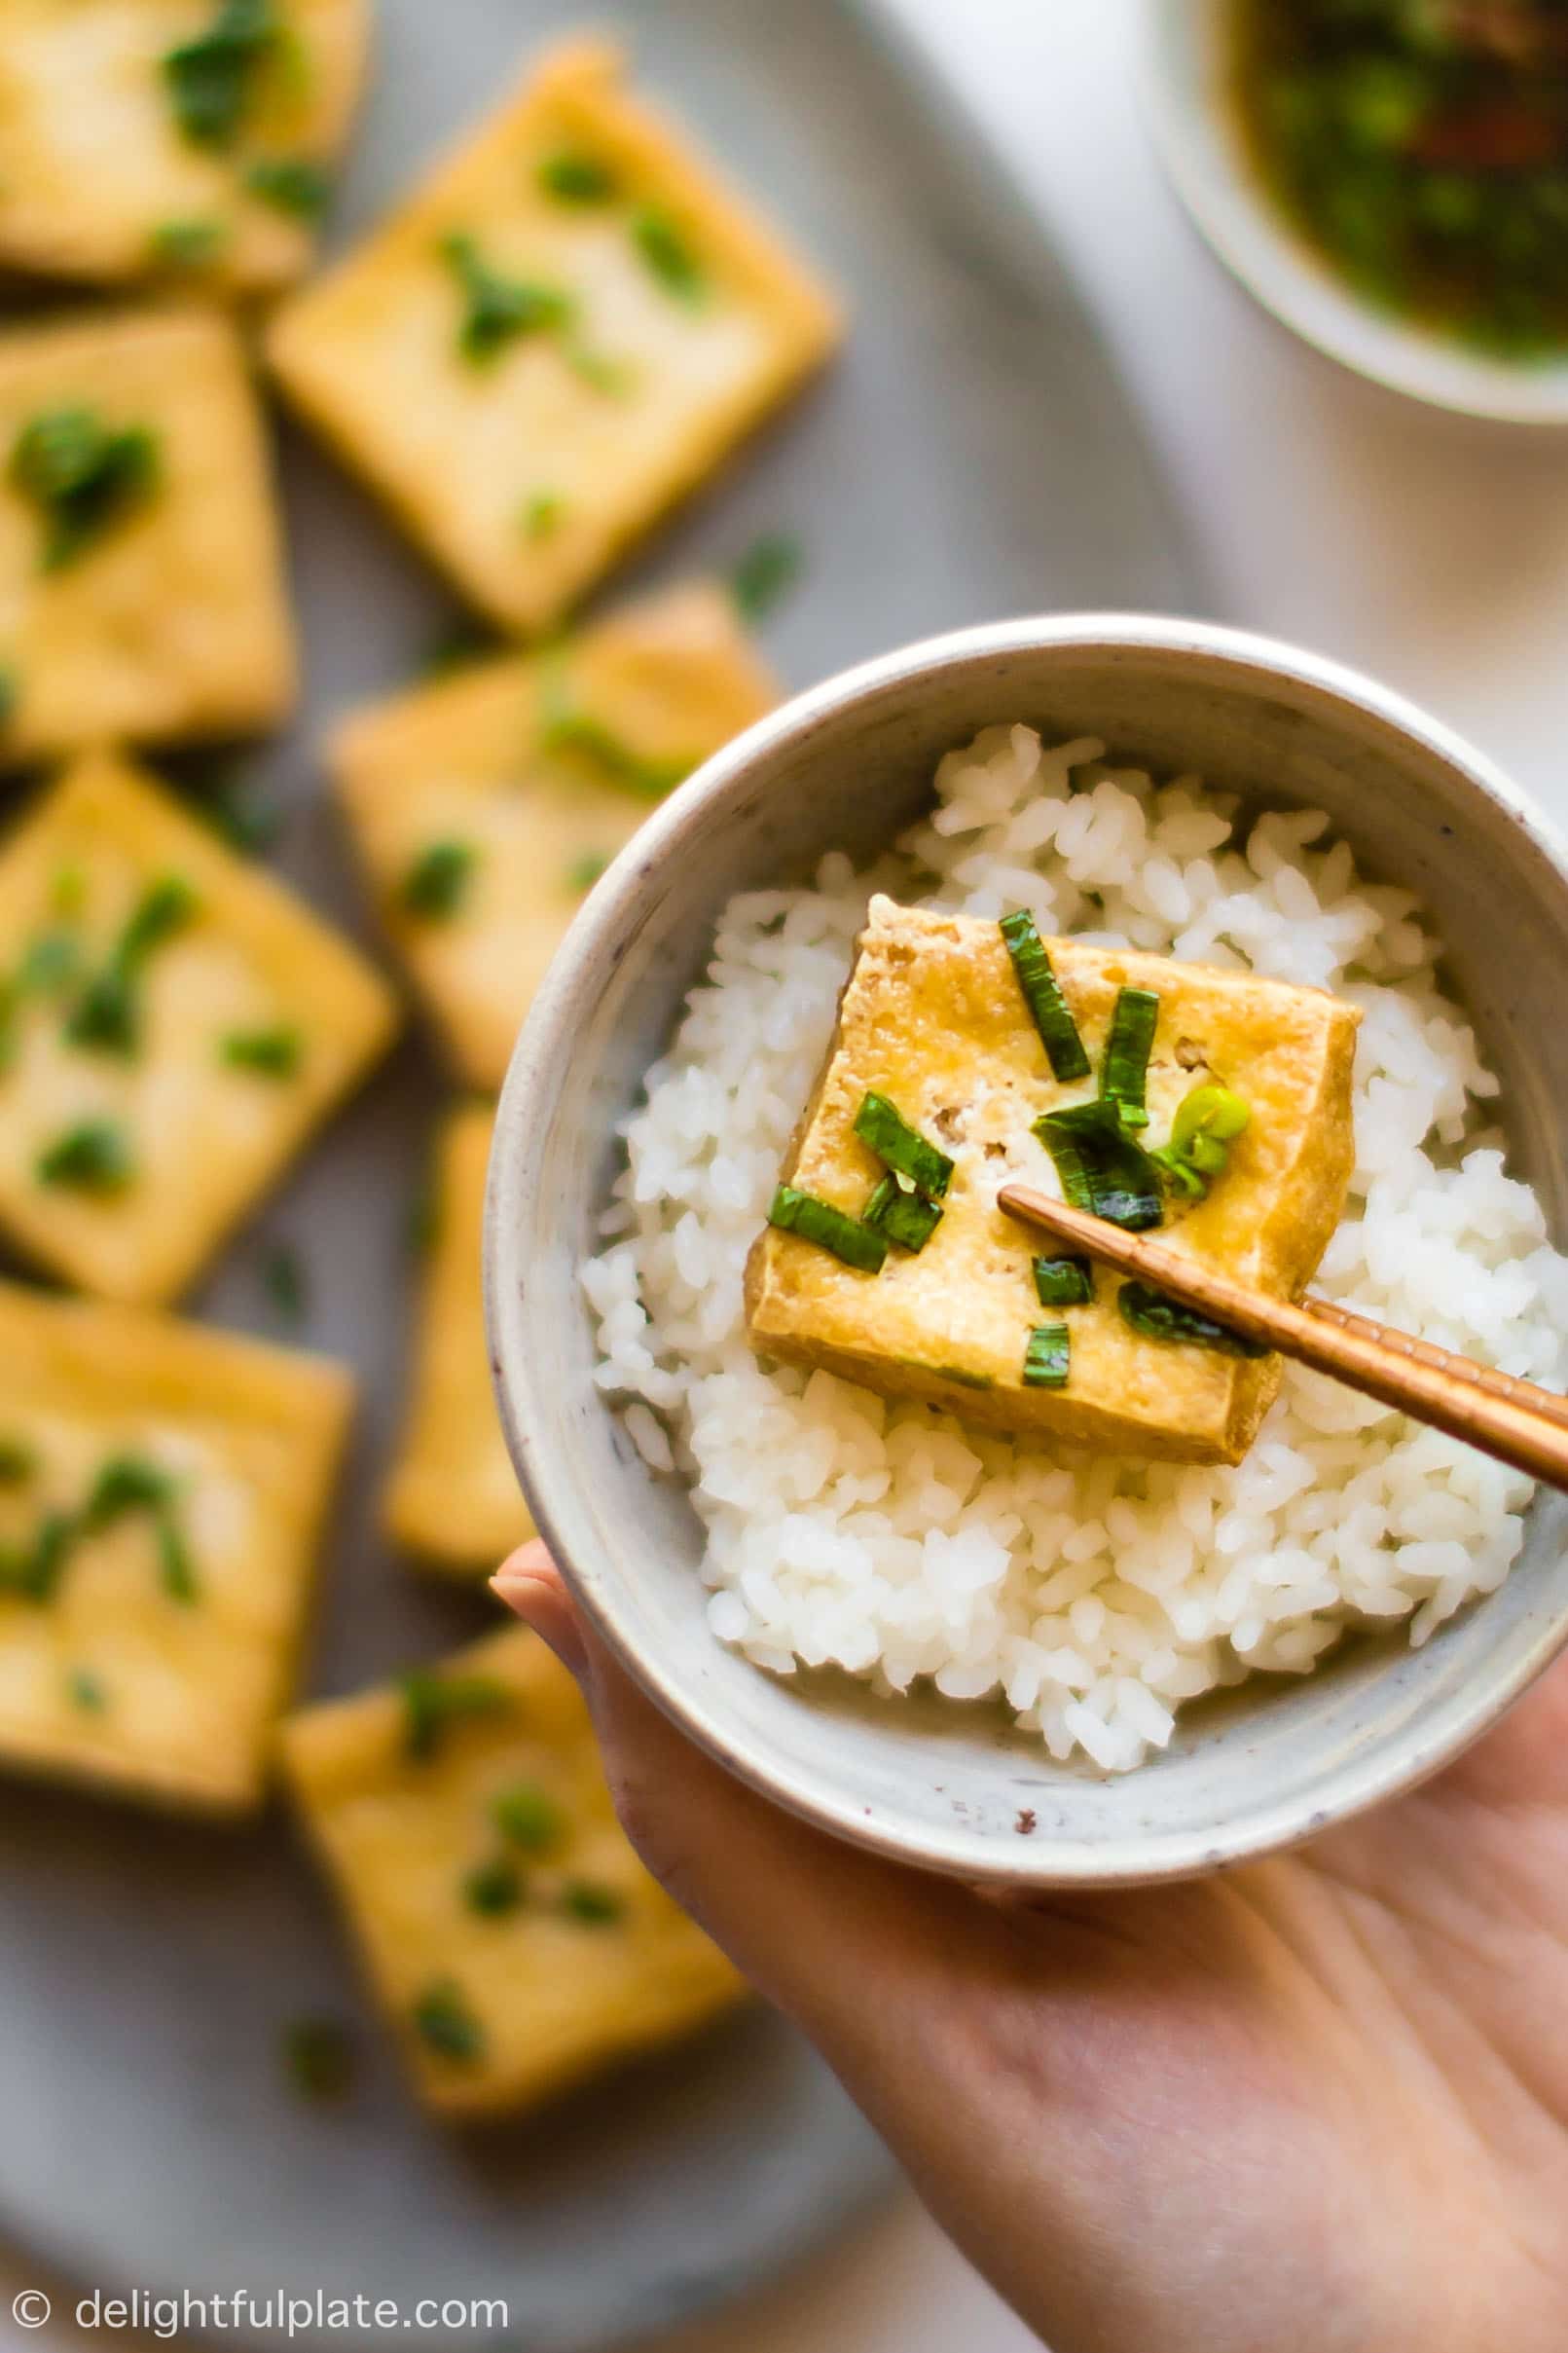 A crispy slice of tofu that has been dipped in scallion fish sauce, served over rice